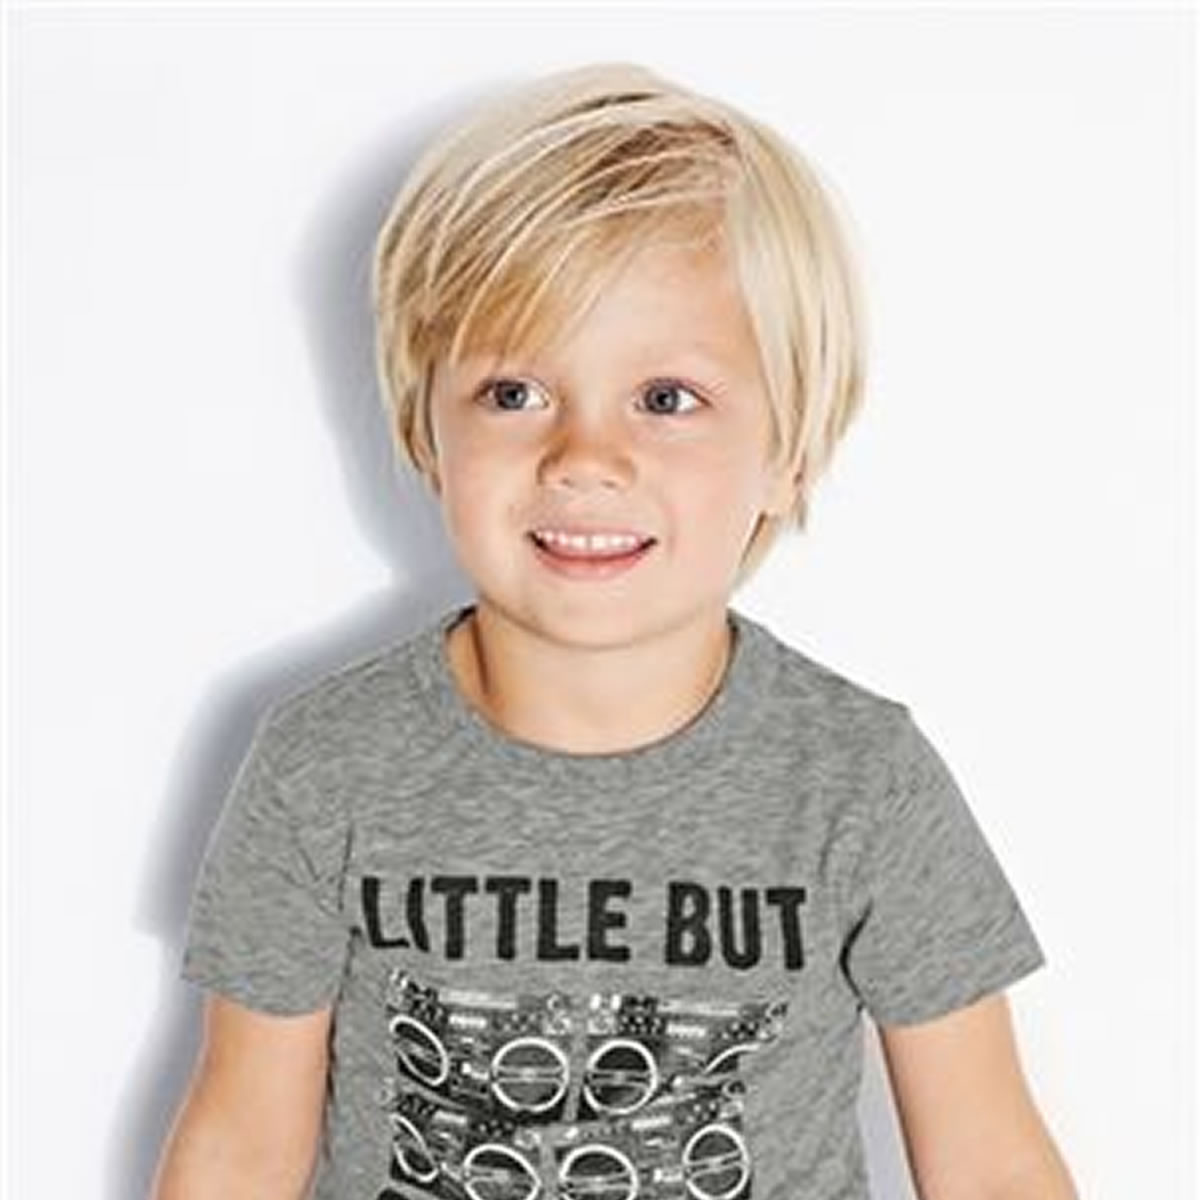 Toddler Boy Long Haircuts
 Great Hairstyles and Haircuts ideas for Little Boys 2018